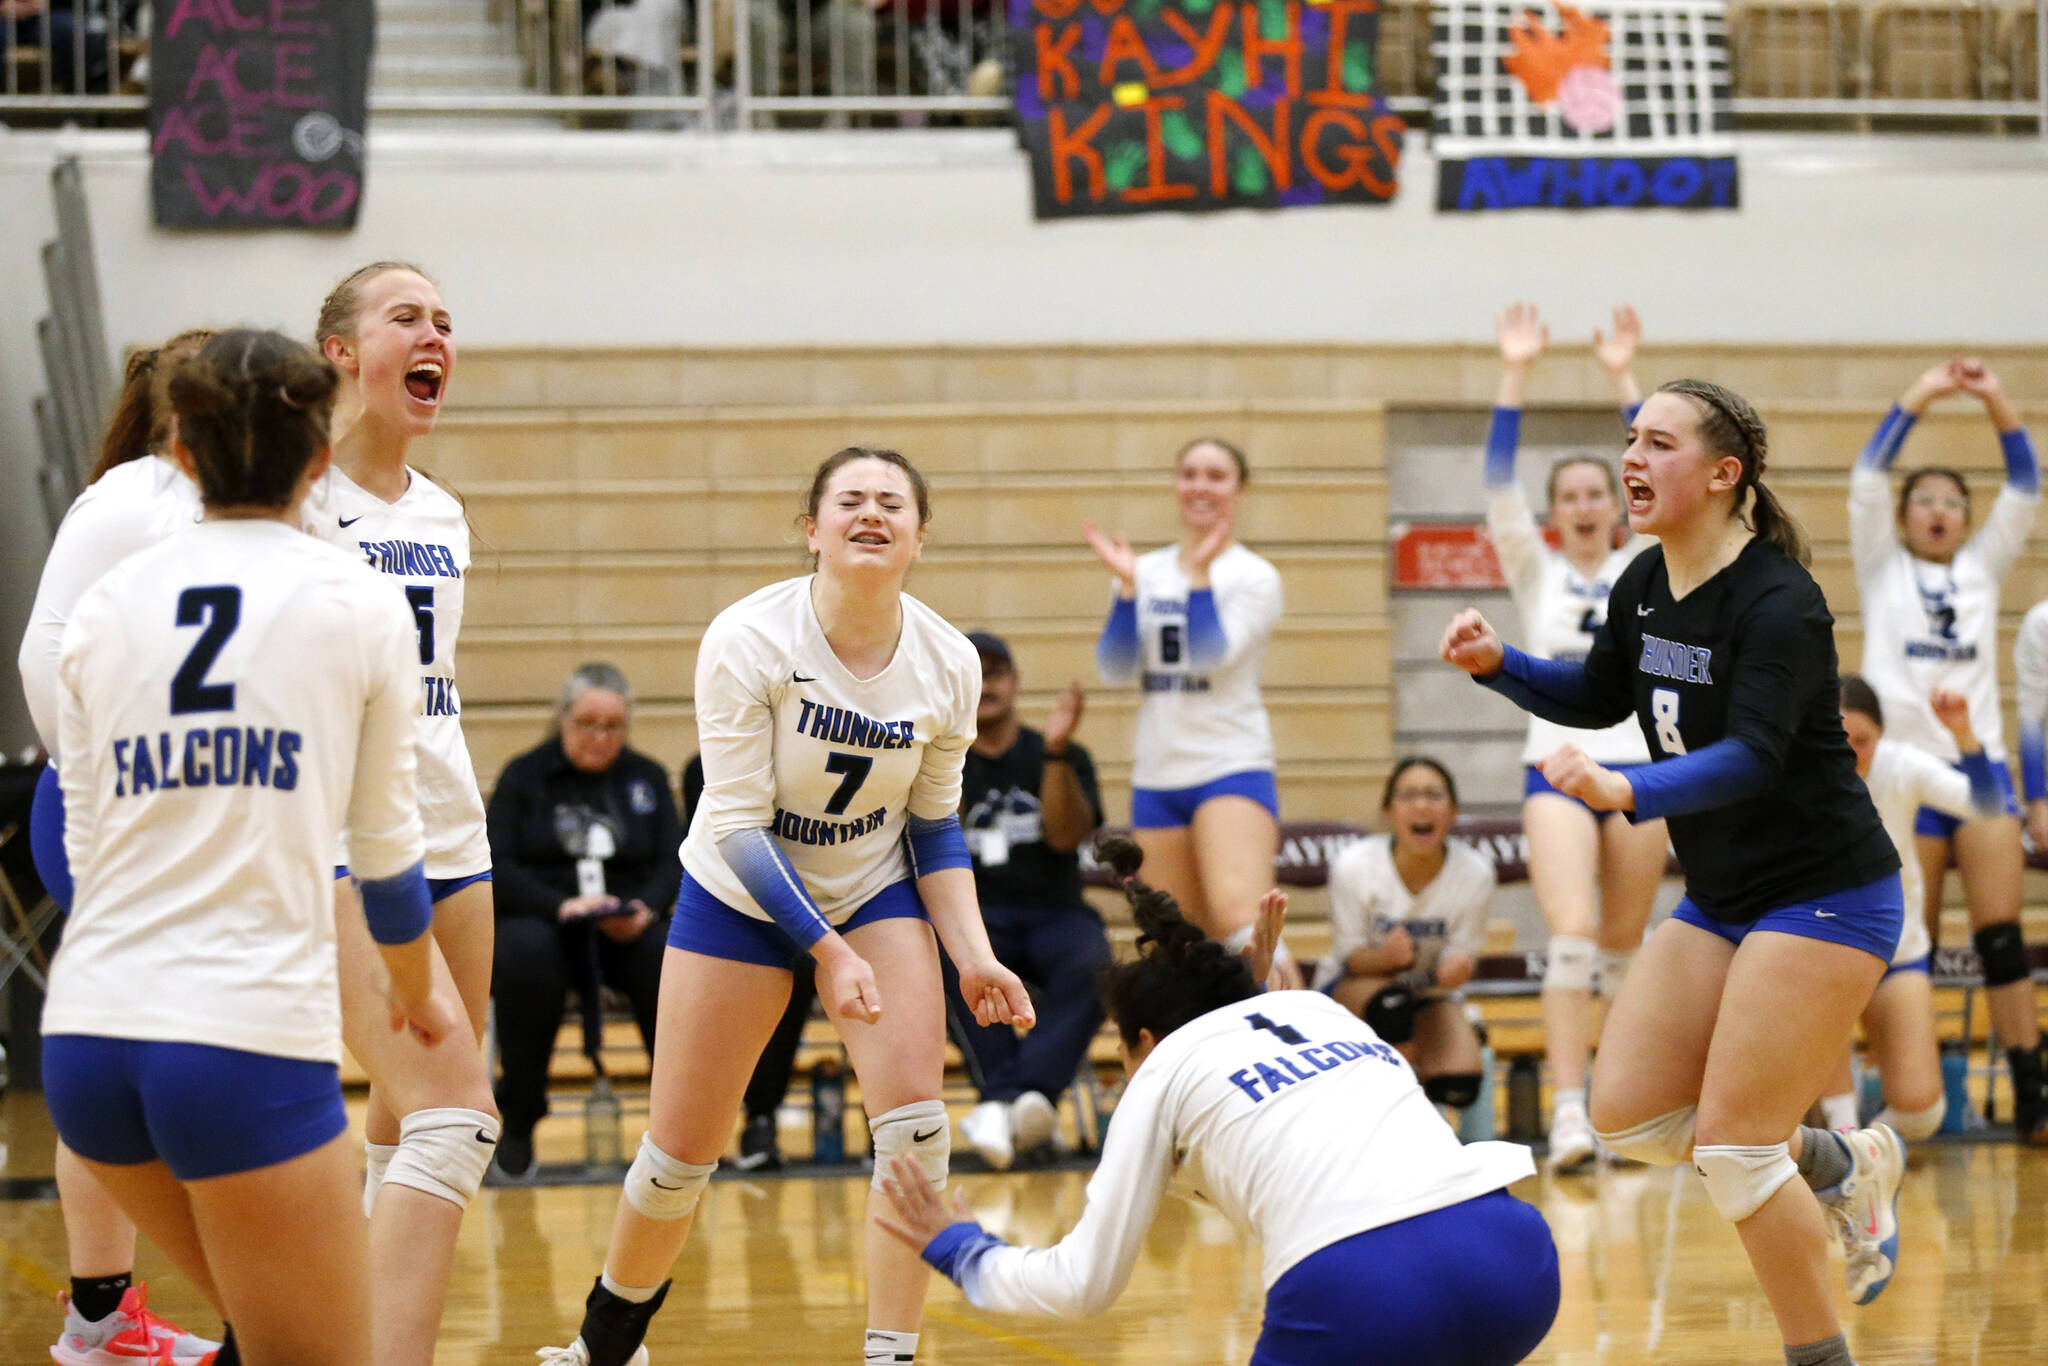 Thunder Mountain High School players celebrate after scoring a point during their 3-1 victory over Ketchikan High School to win the Region V Volleyball Tournament in Ketchikan on Saturday. (Christopher Mullen / Ketchikan Daily News)